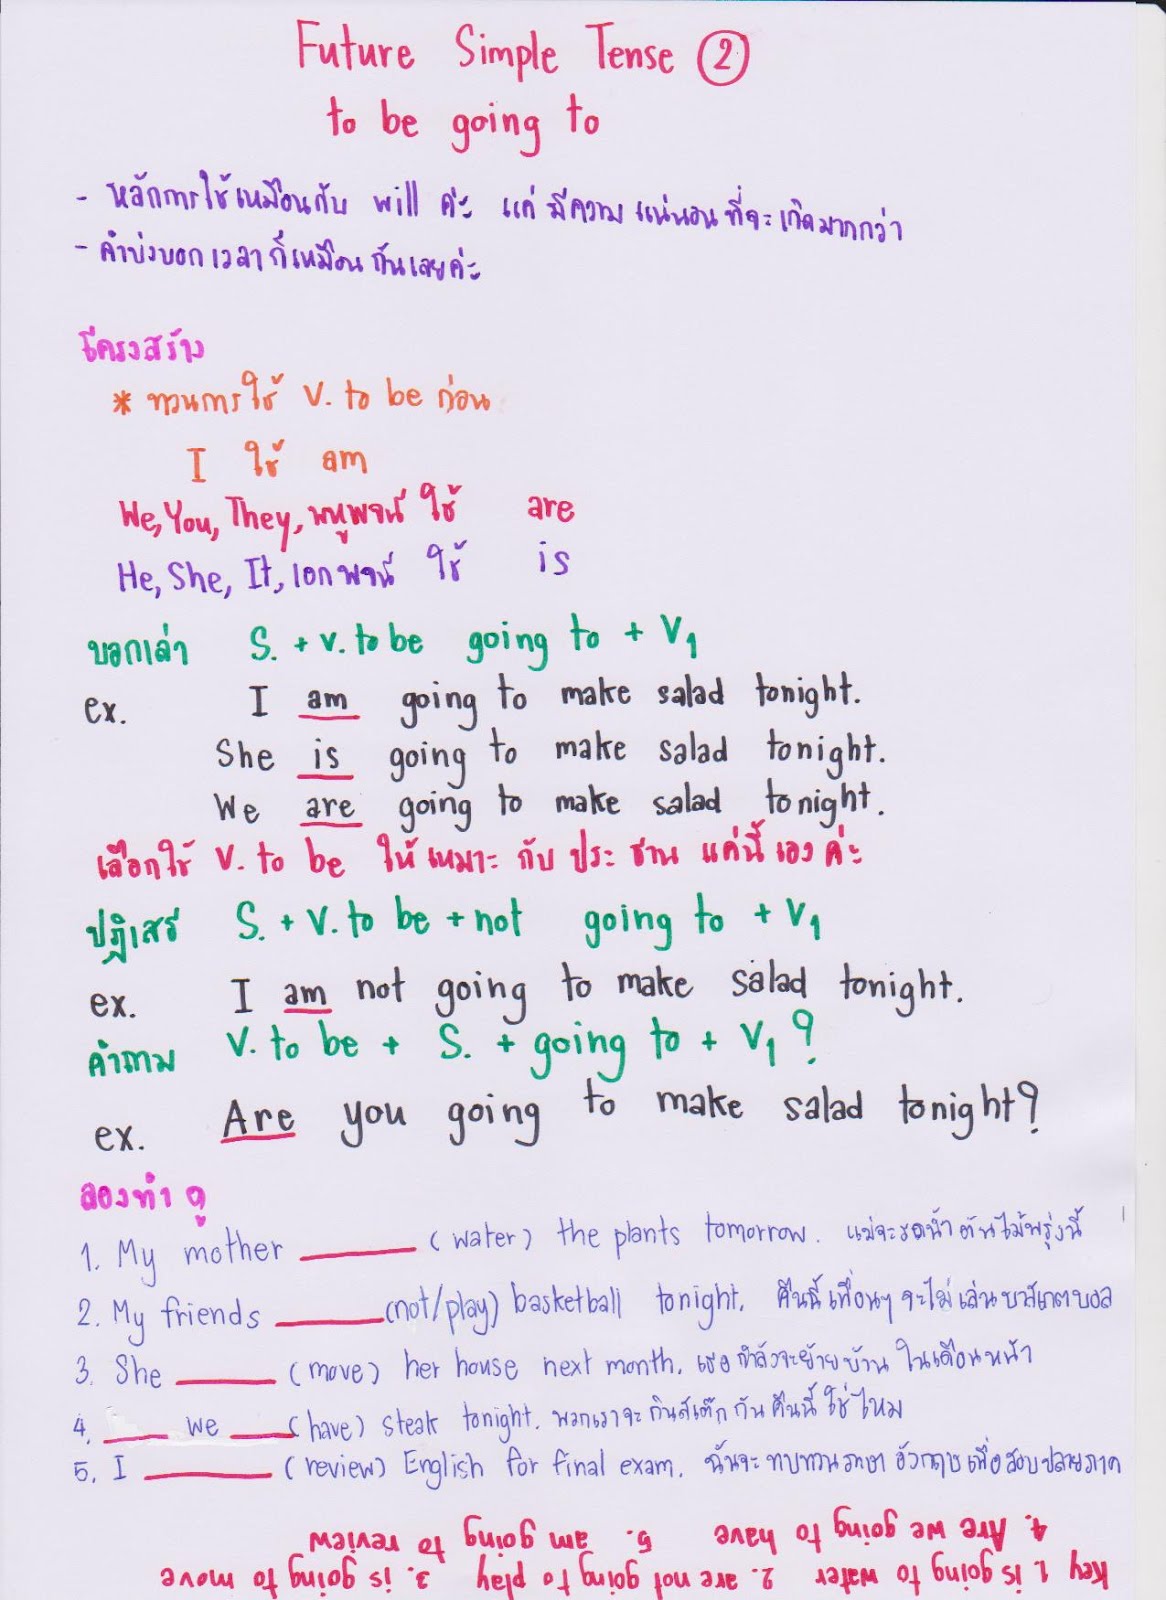 English For M.1-3: การใช้ To Be Going To ใน Future Simple Tense ค่ะ